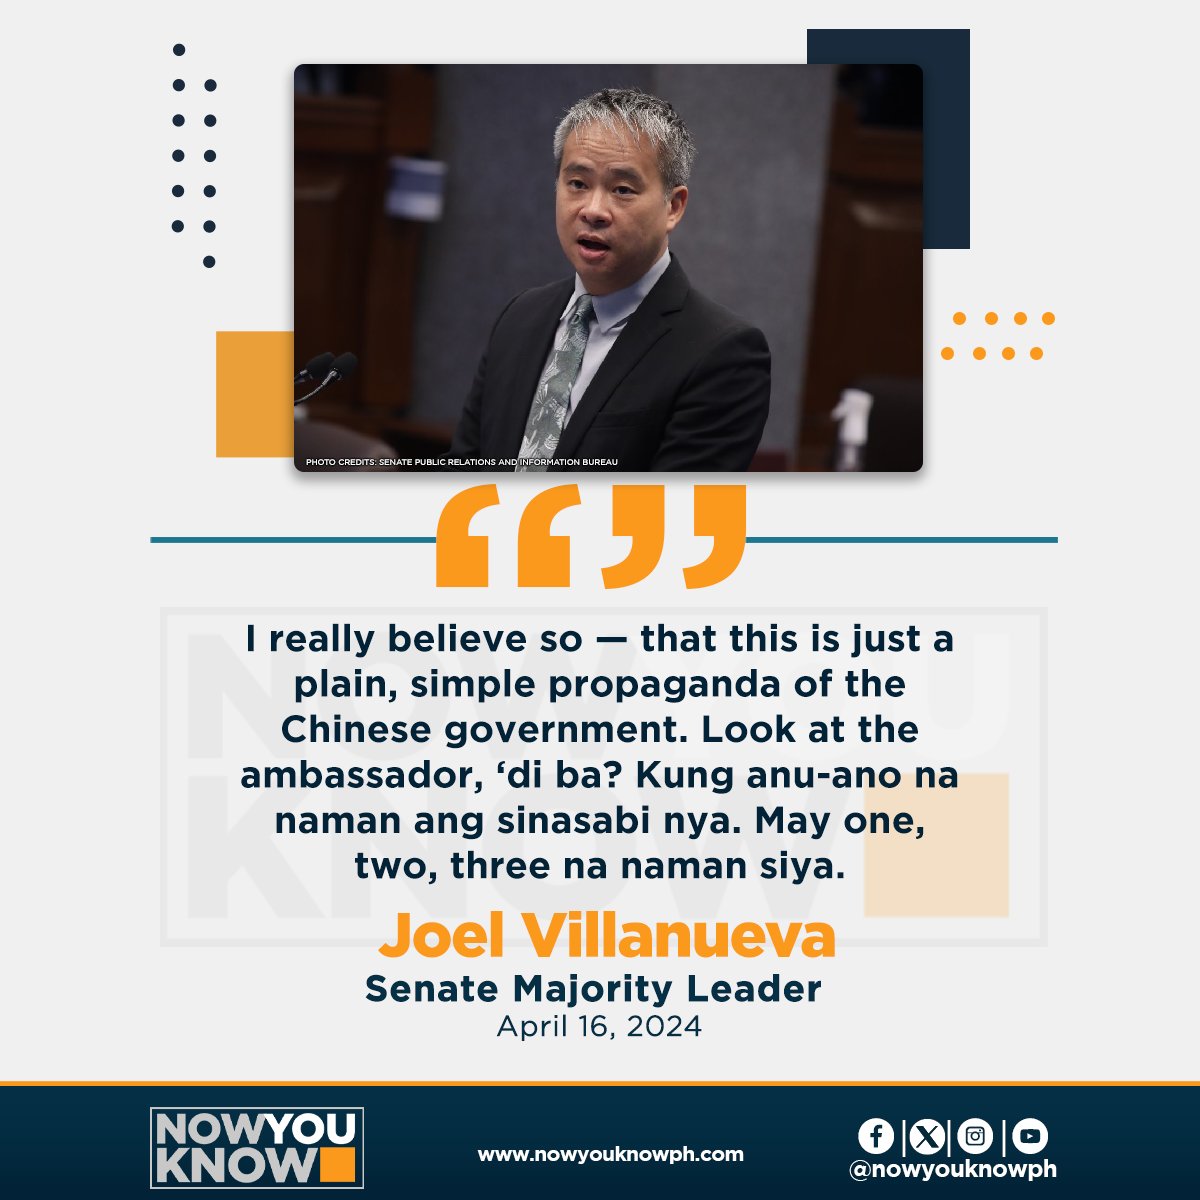 Senate Majority Leader Joel Villanueva downplayed the so-called “gentleman’s agreement” entered into by former President Rodrigo Duterte with China, calling it a mere propaganda by the Asian giant. READ: bitly.ws/3i7ui 📰Inquirer.net